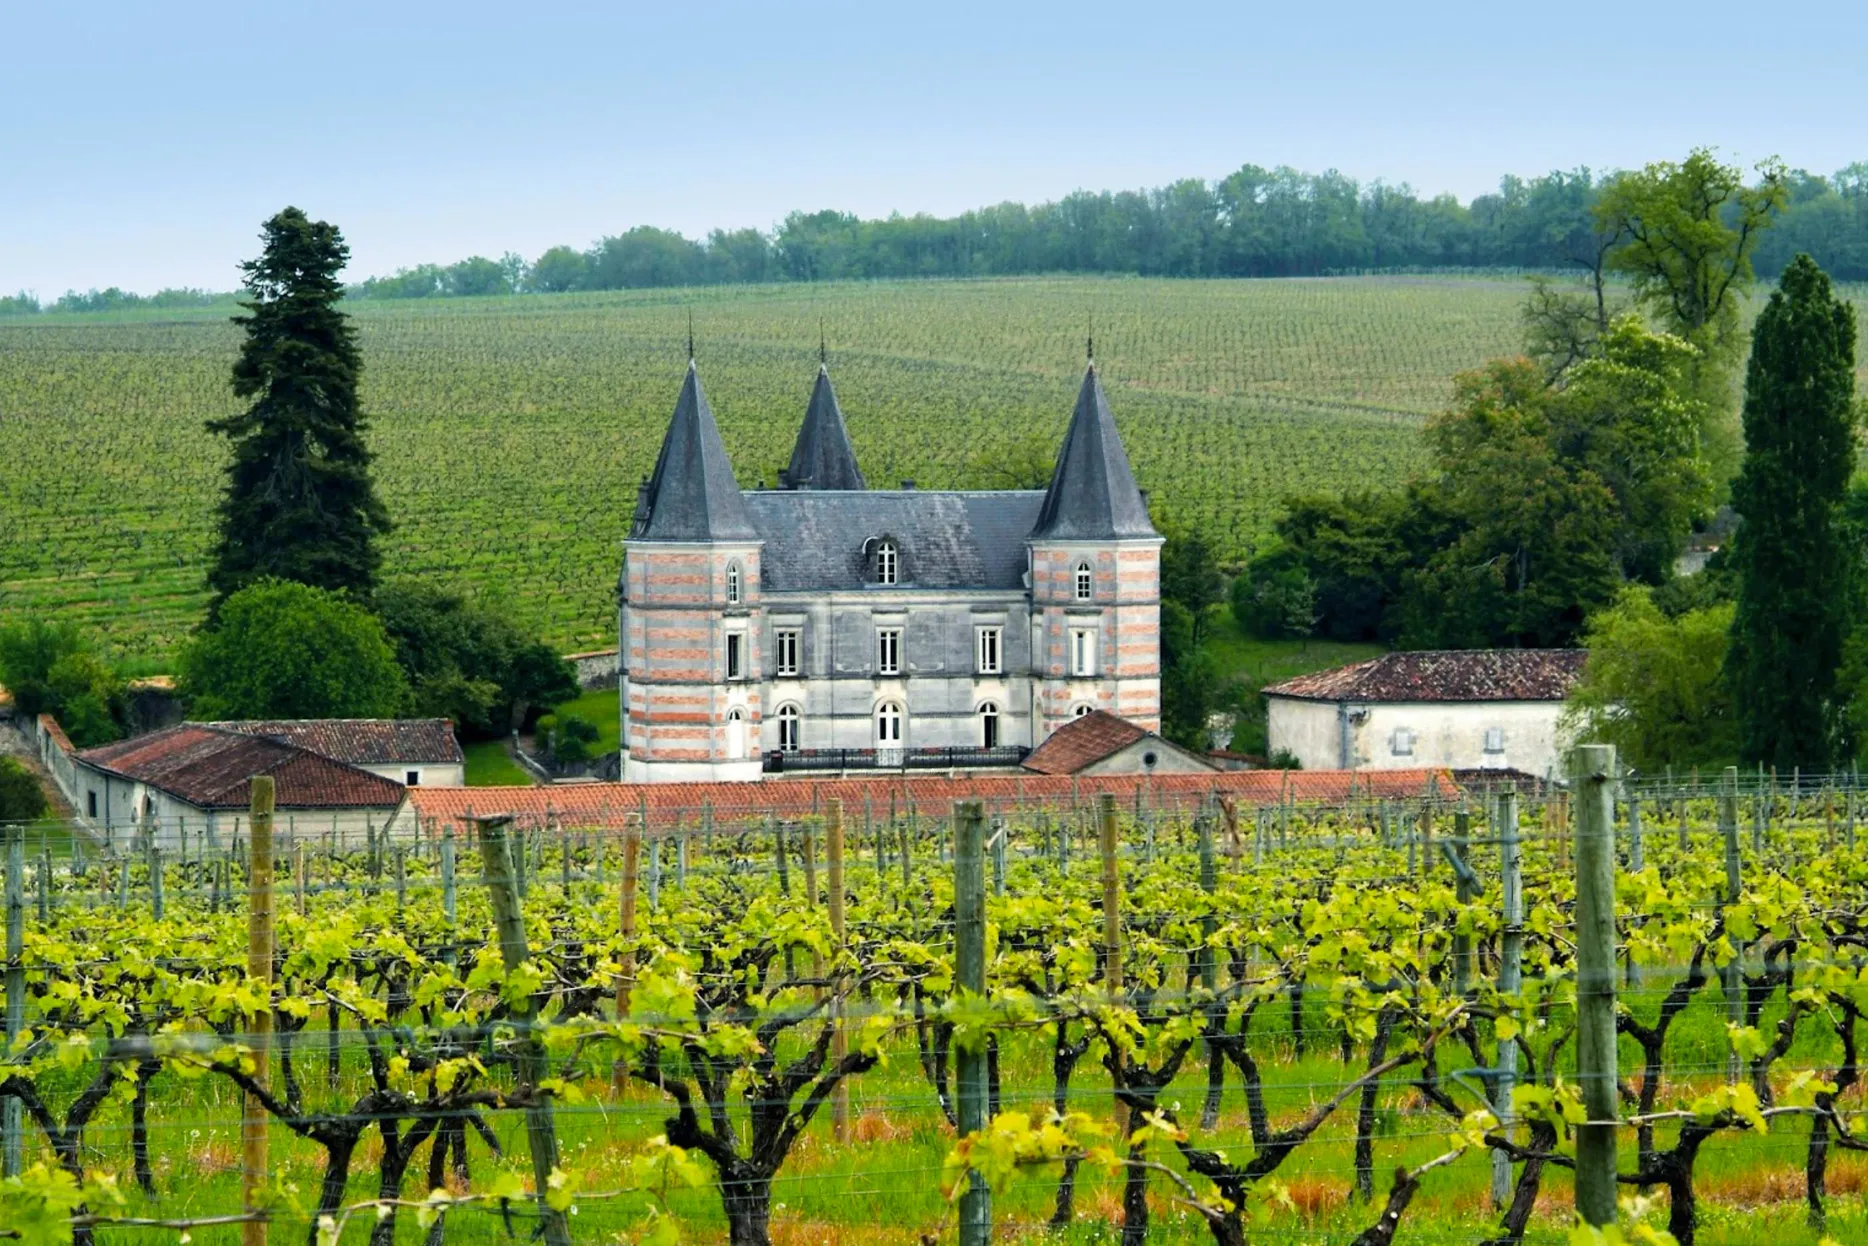 Picturesque chateau surrounded by vines in Champagne, France